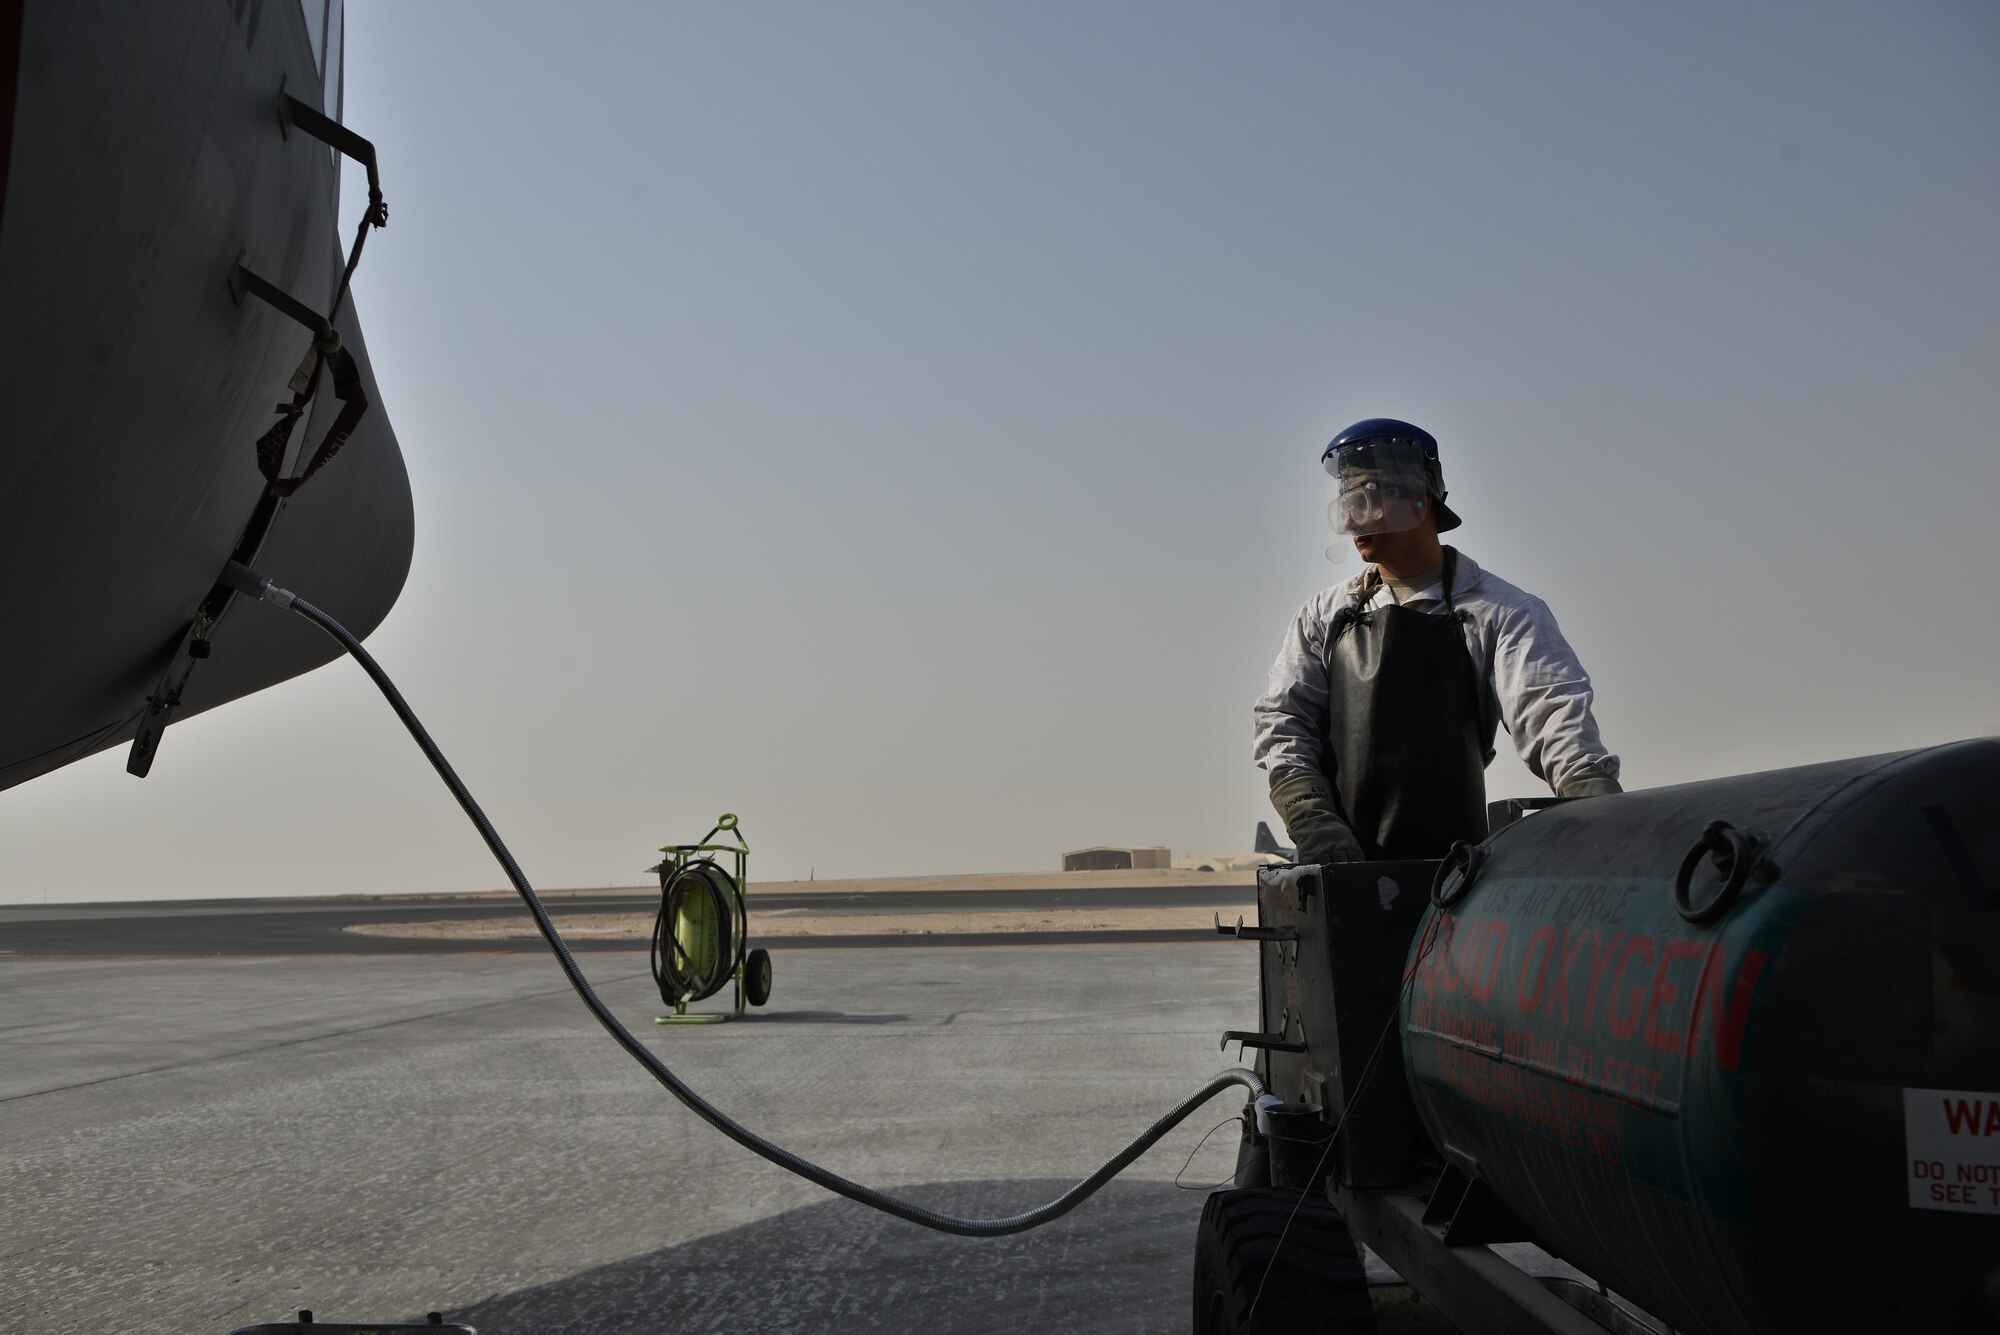 Senior Airman Matthew Krzywiecki, 379th Expeditionary Aircraft Maintenance Squadron, 746th Expeditionary Aircraft Maintenance Unit, recharges a C-130 Hercules with liquid oxygen September 9, 2015 at Al Udeid Air Base, Qatar. The 746th AMU cryogenics airmen work with liquid nitrogen and liquid oxygen that is recharged into aircraft providing aircrews with pure oxygen at altitude during missions in support of Operation Inherent Resolve. Krzywiecki is a deployed member from the 911th Airlift Wing, Pittsburgh International Airport Air Reserve Station, Pa. (U.S. Air Force photo/Staff Sgt. Alexandre Montes)  